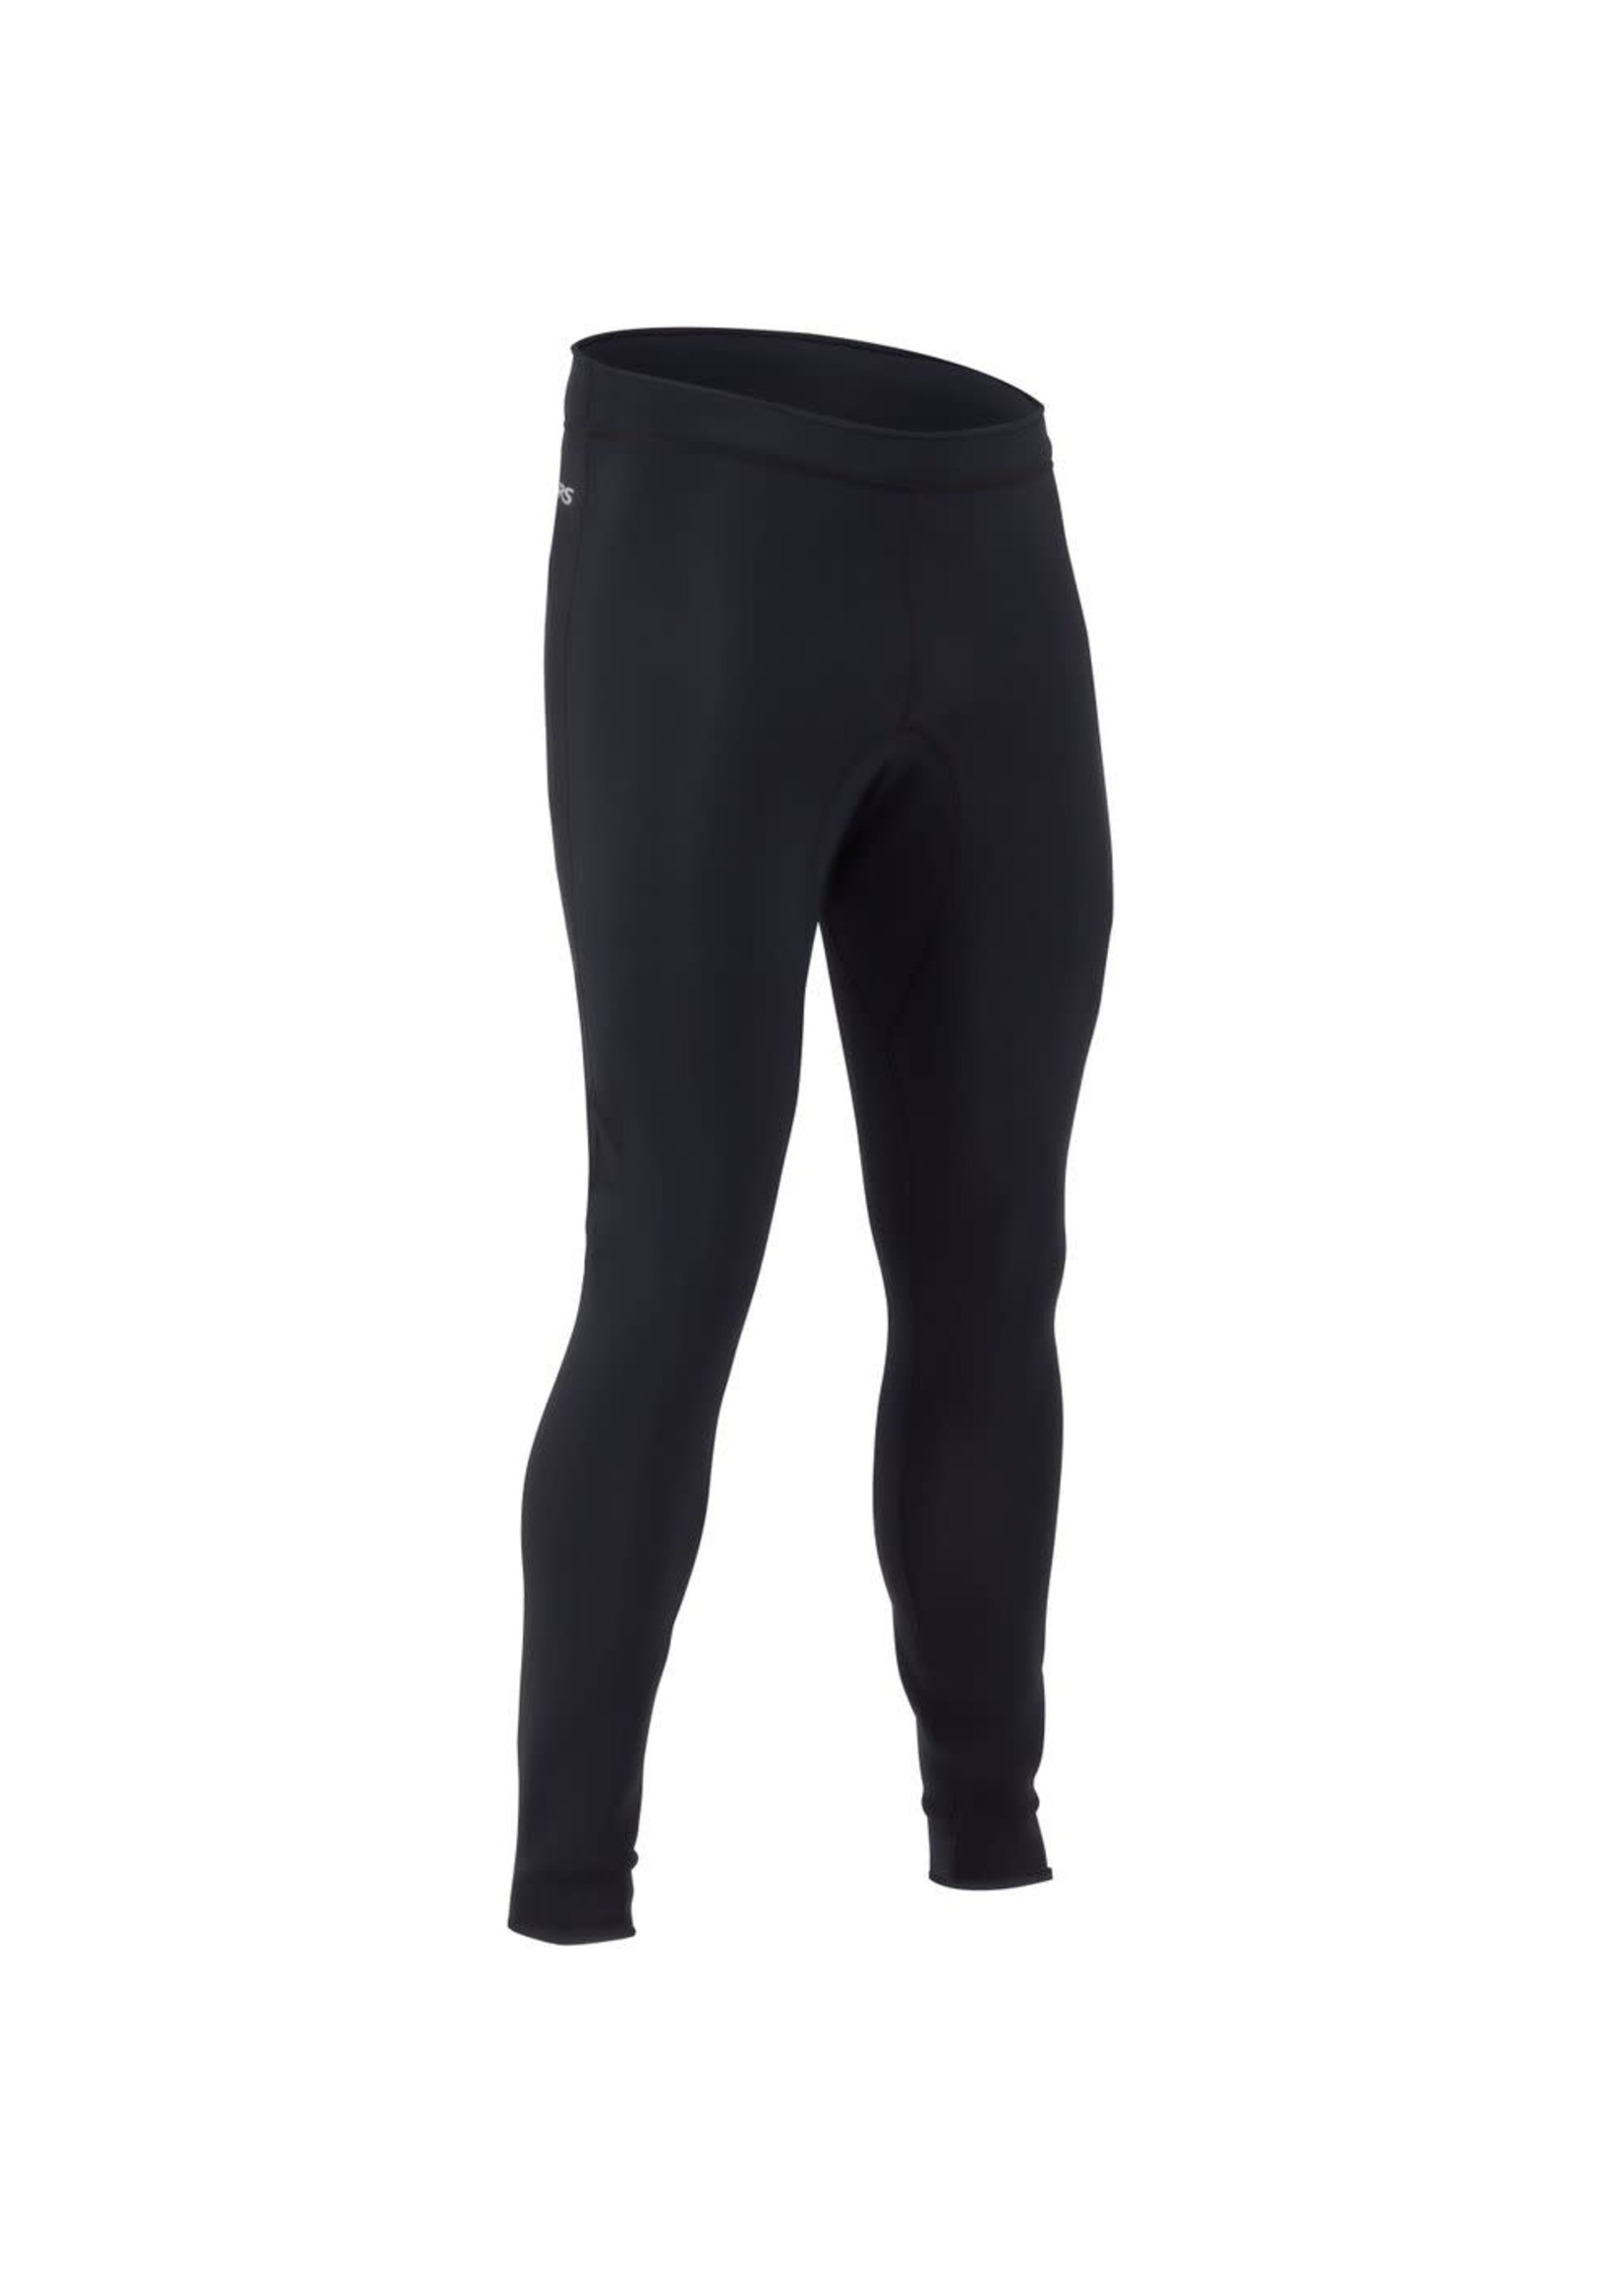 NRS Pantalons isothermiques Hydroskin 0.5 pour hommes